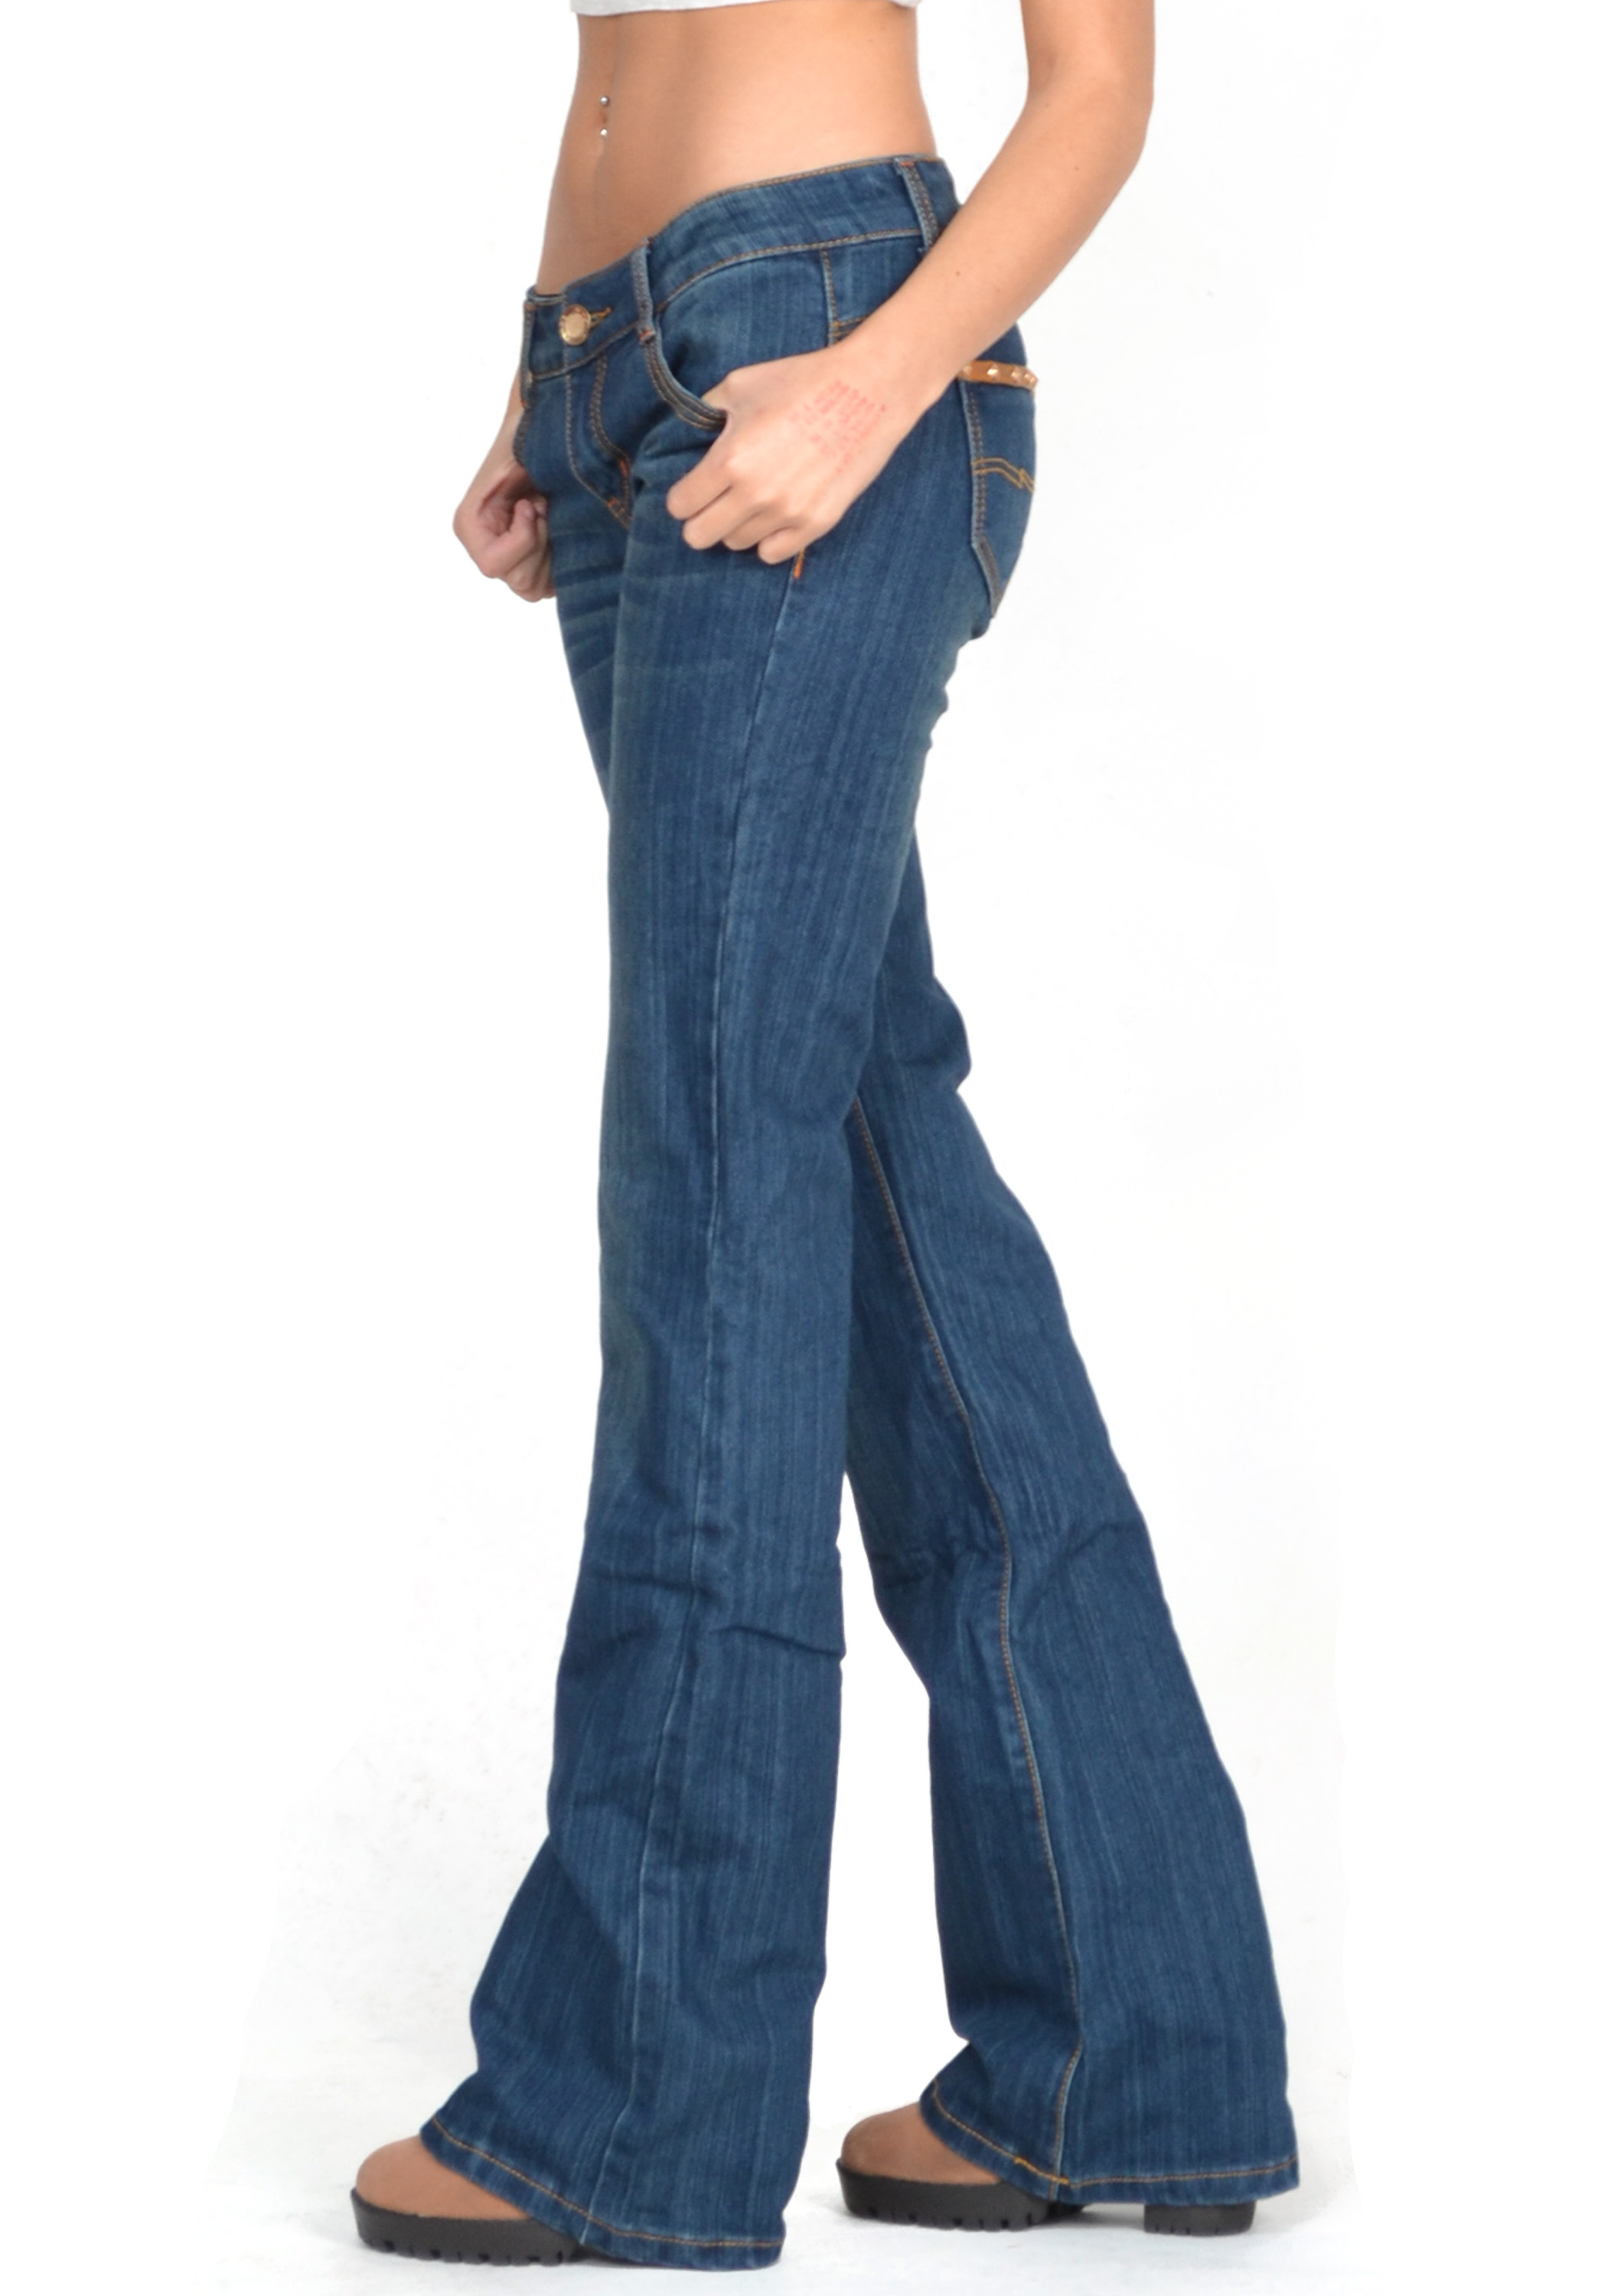 New Womens Hipster Low Rise Bootcut Flared Jeans Blue Bellbottom Denim